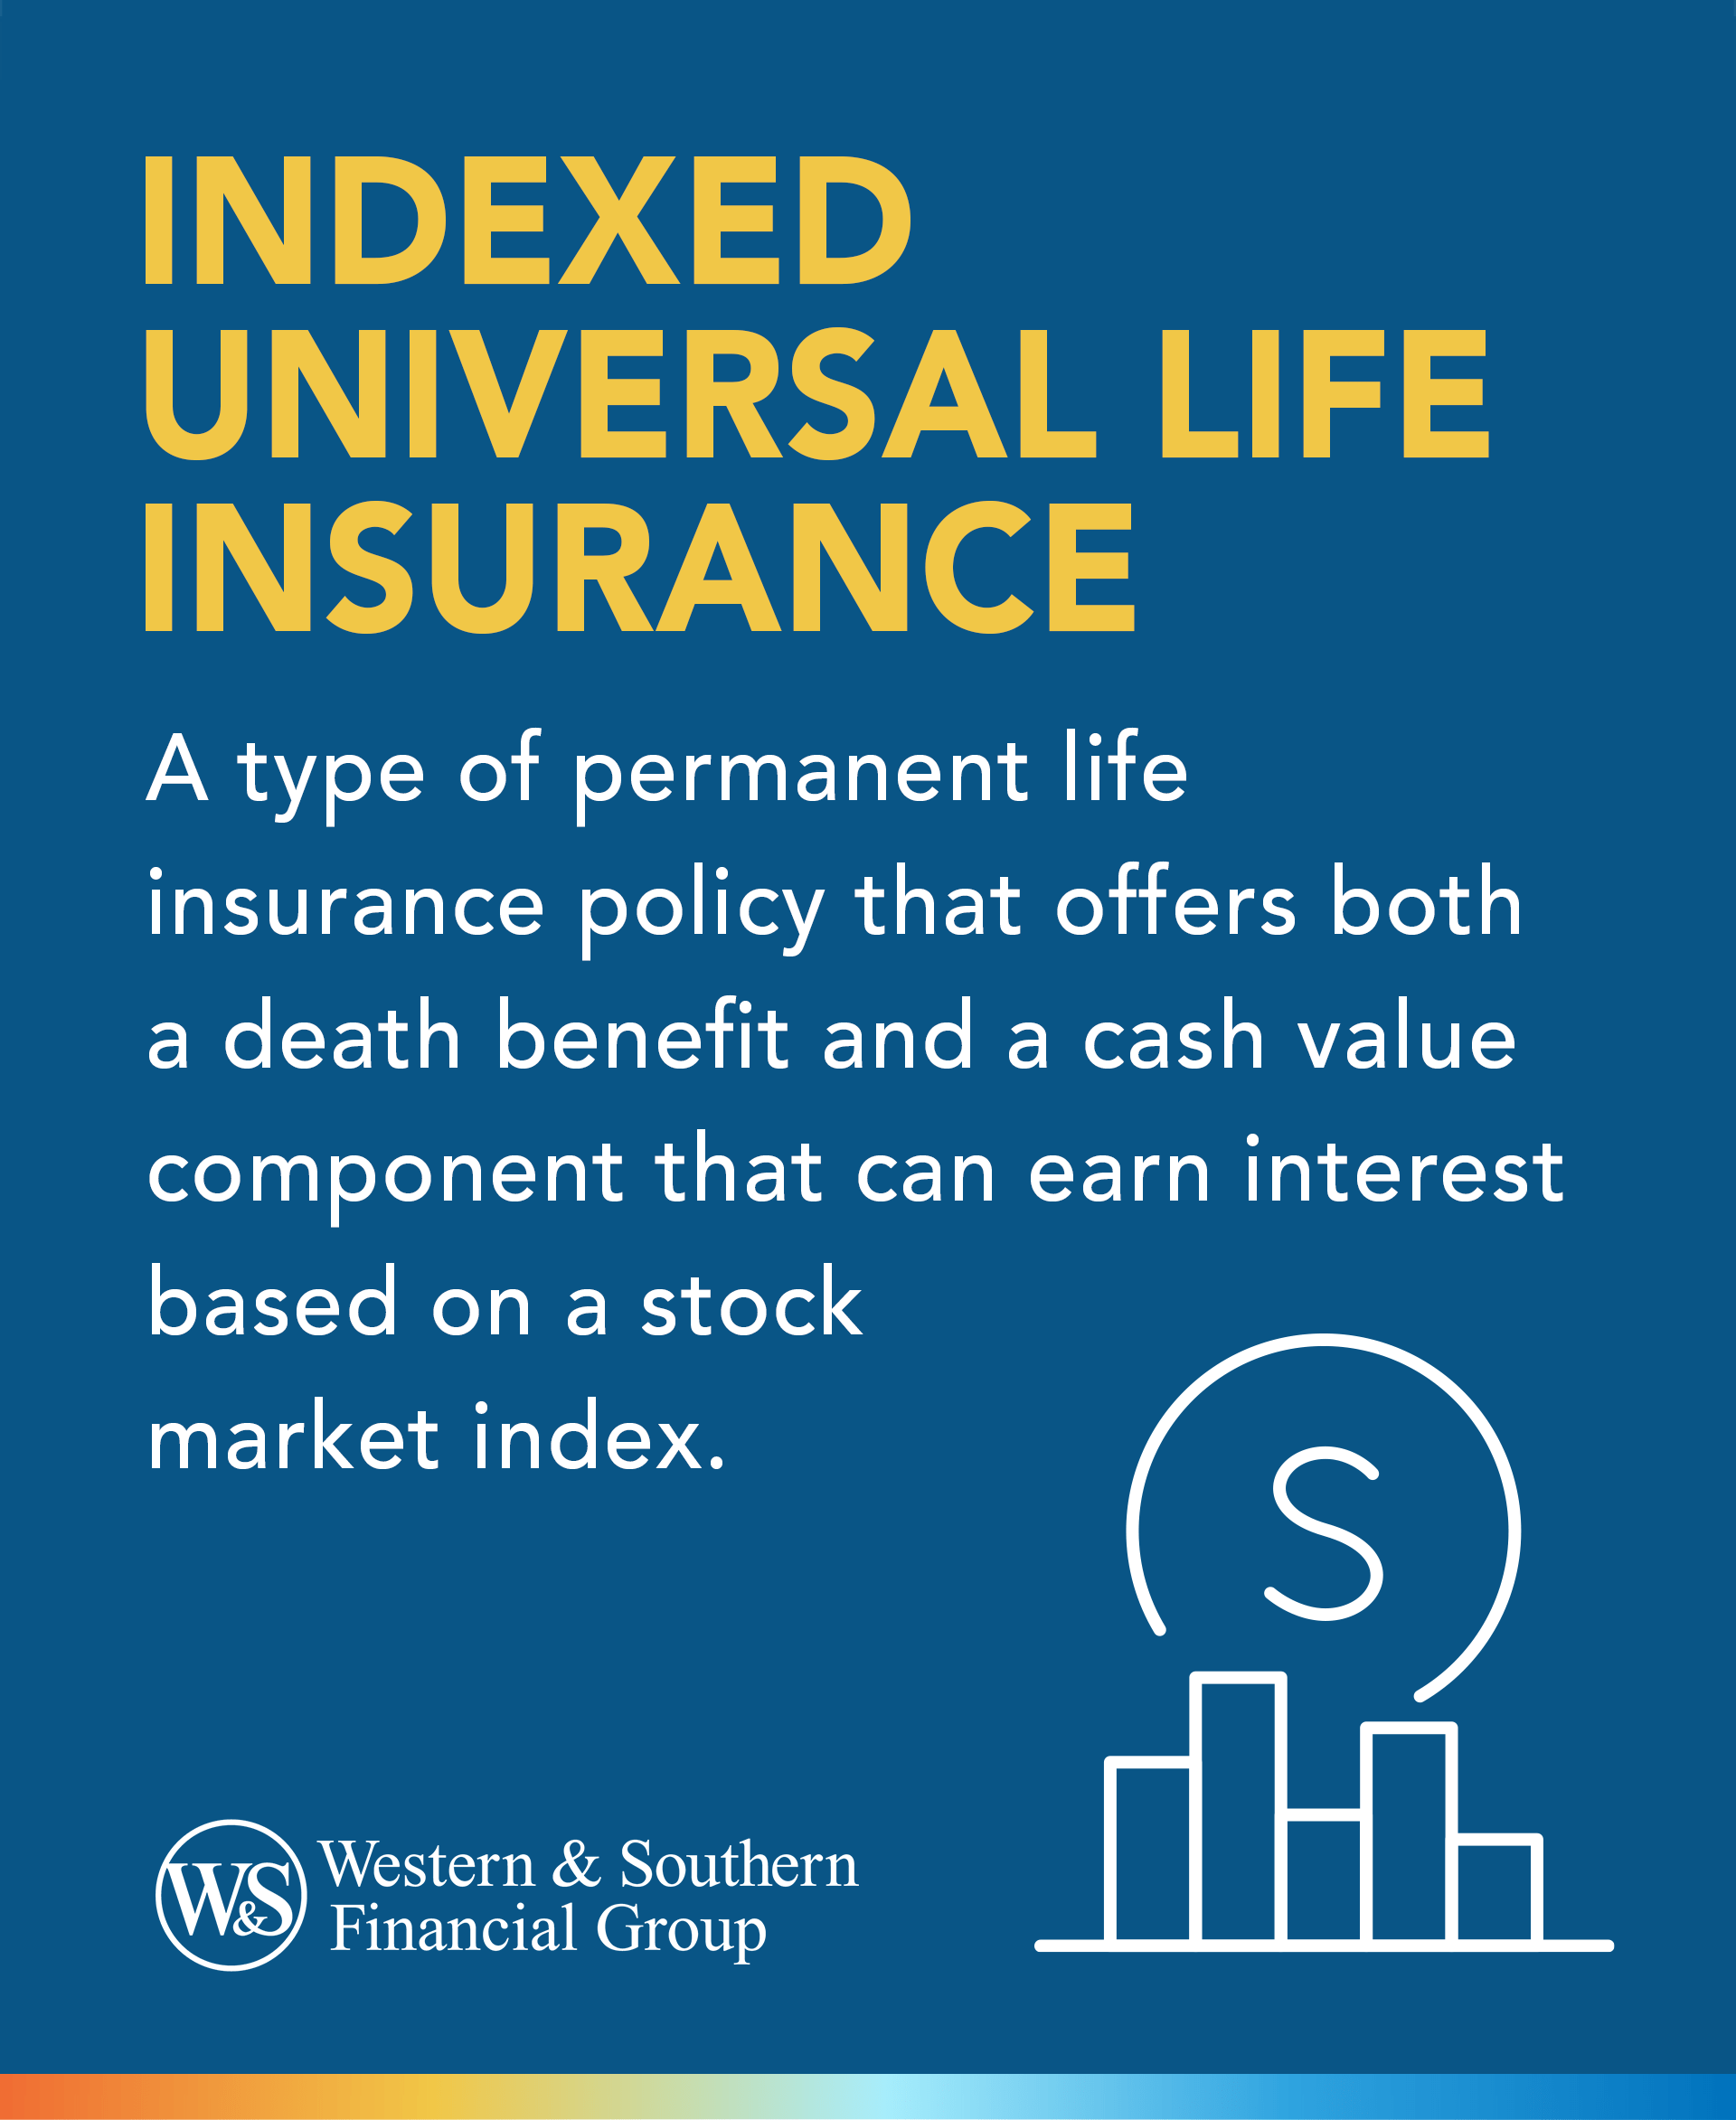 Indexed Universal Life Insurance Definition